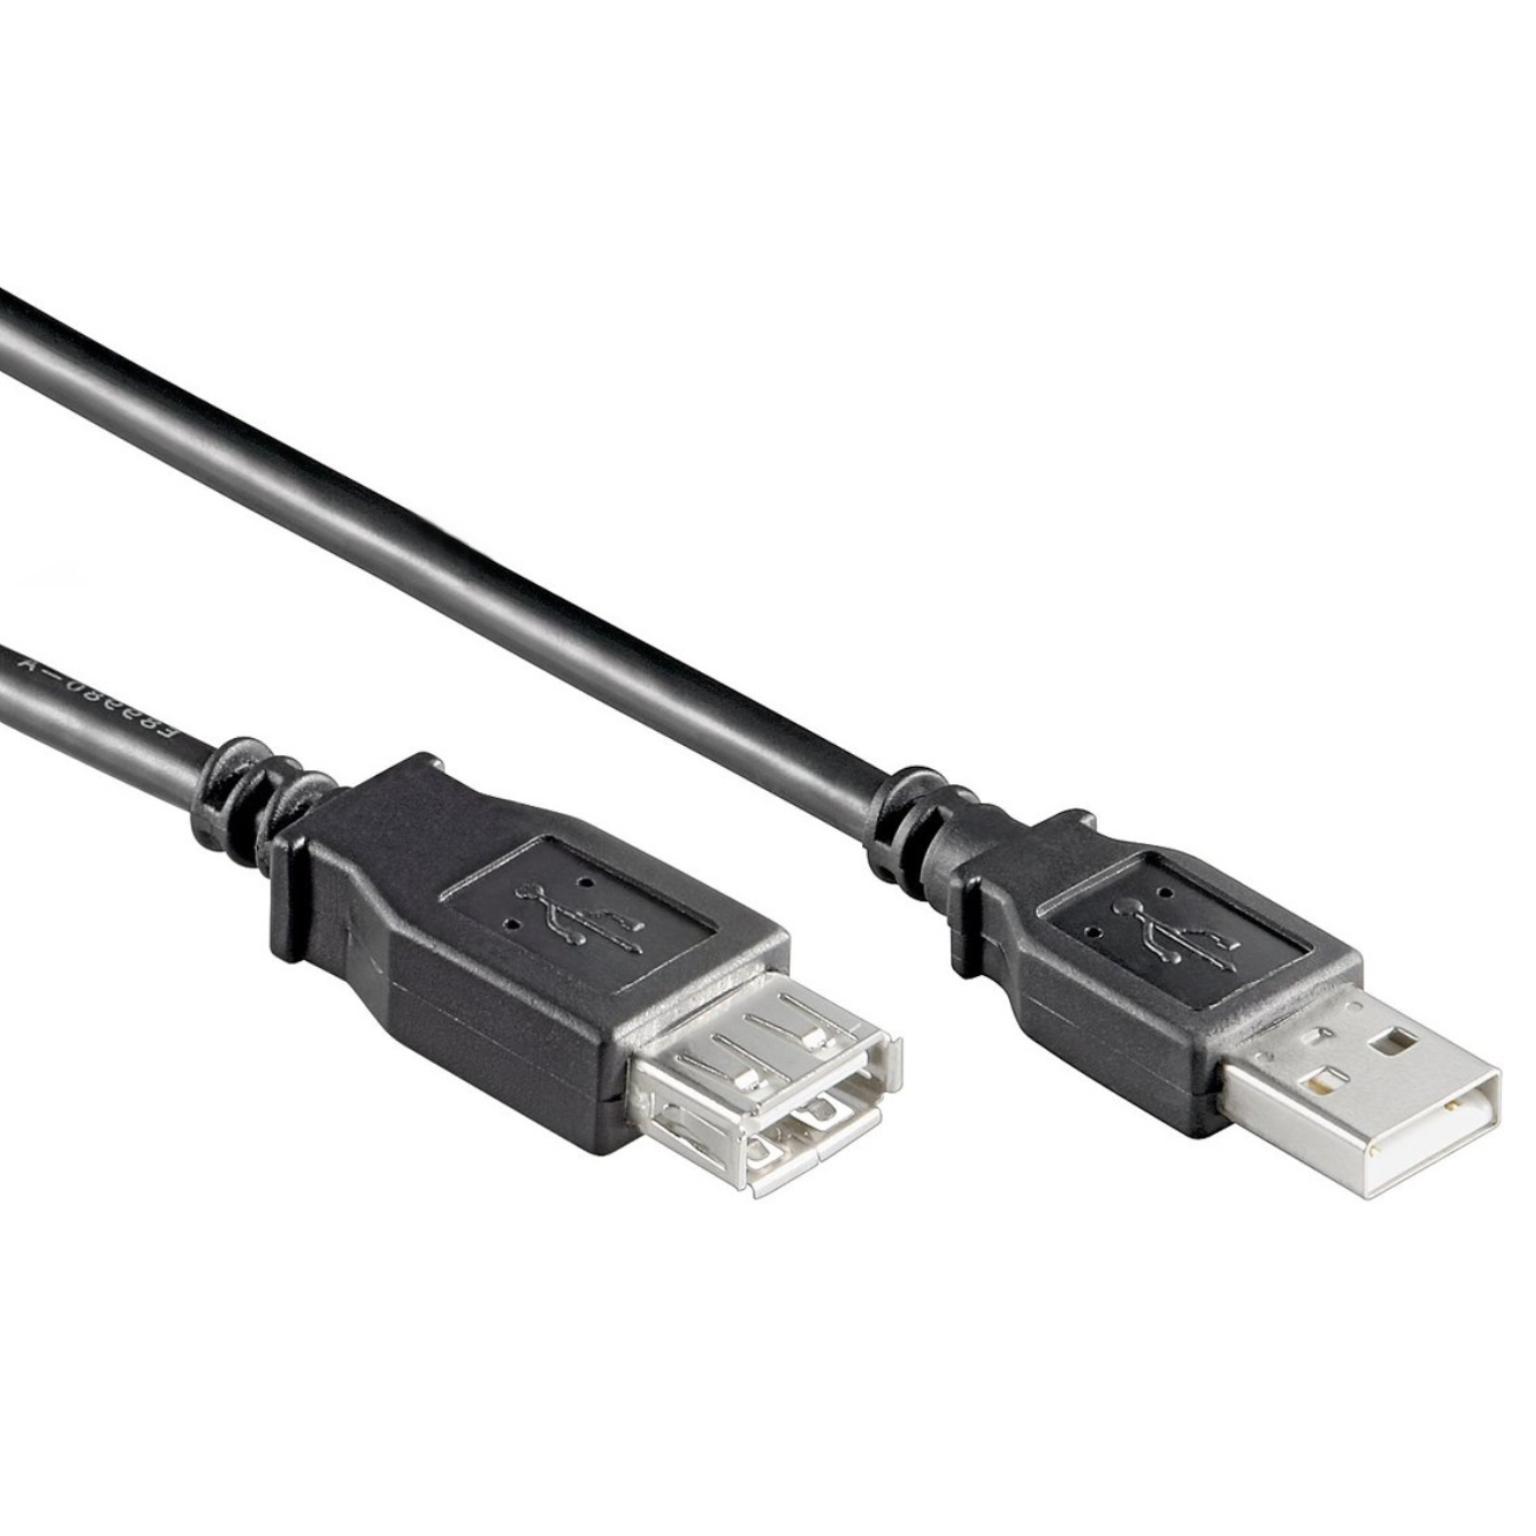 CABLE USB2.0 40 CM تطويلة ,Cable